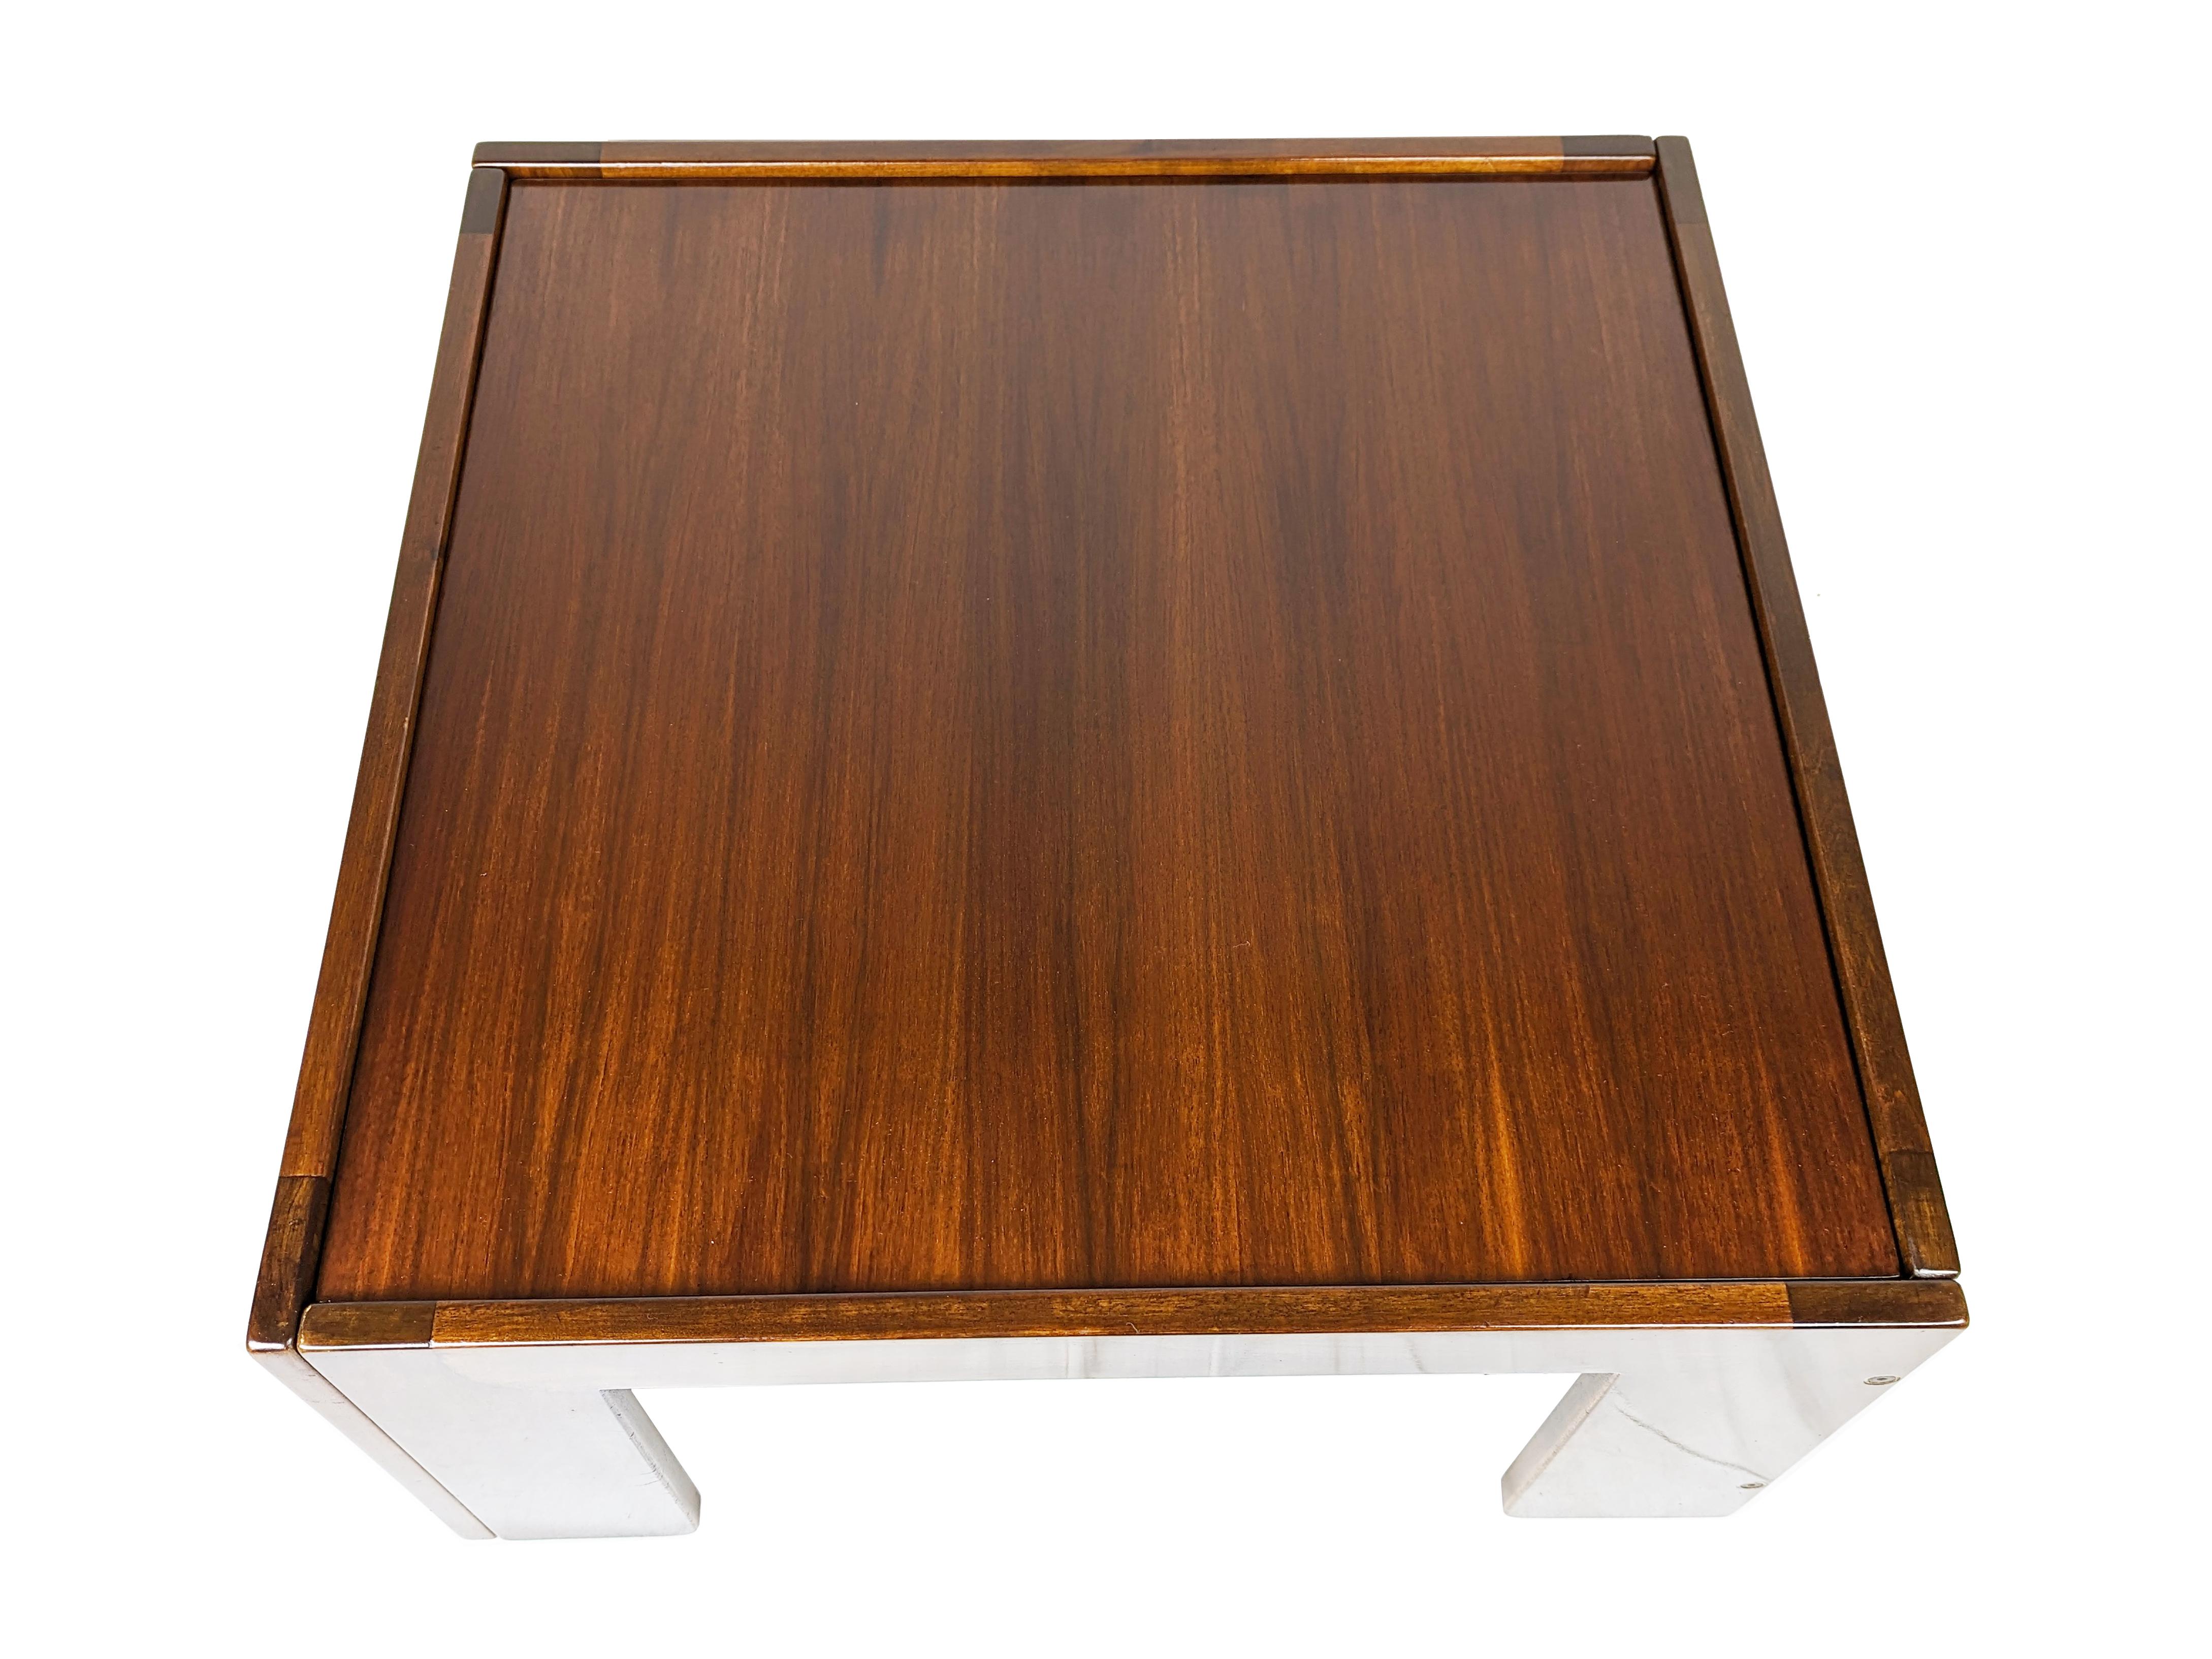 Italian Walnut square coffee table by Afra & Tobia Scarpa for Cassina, 1960s For Sale